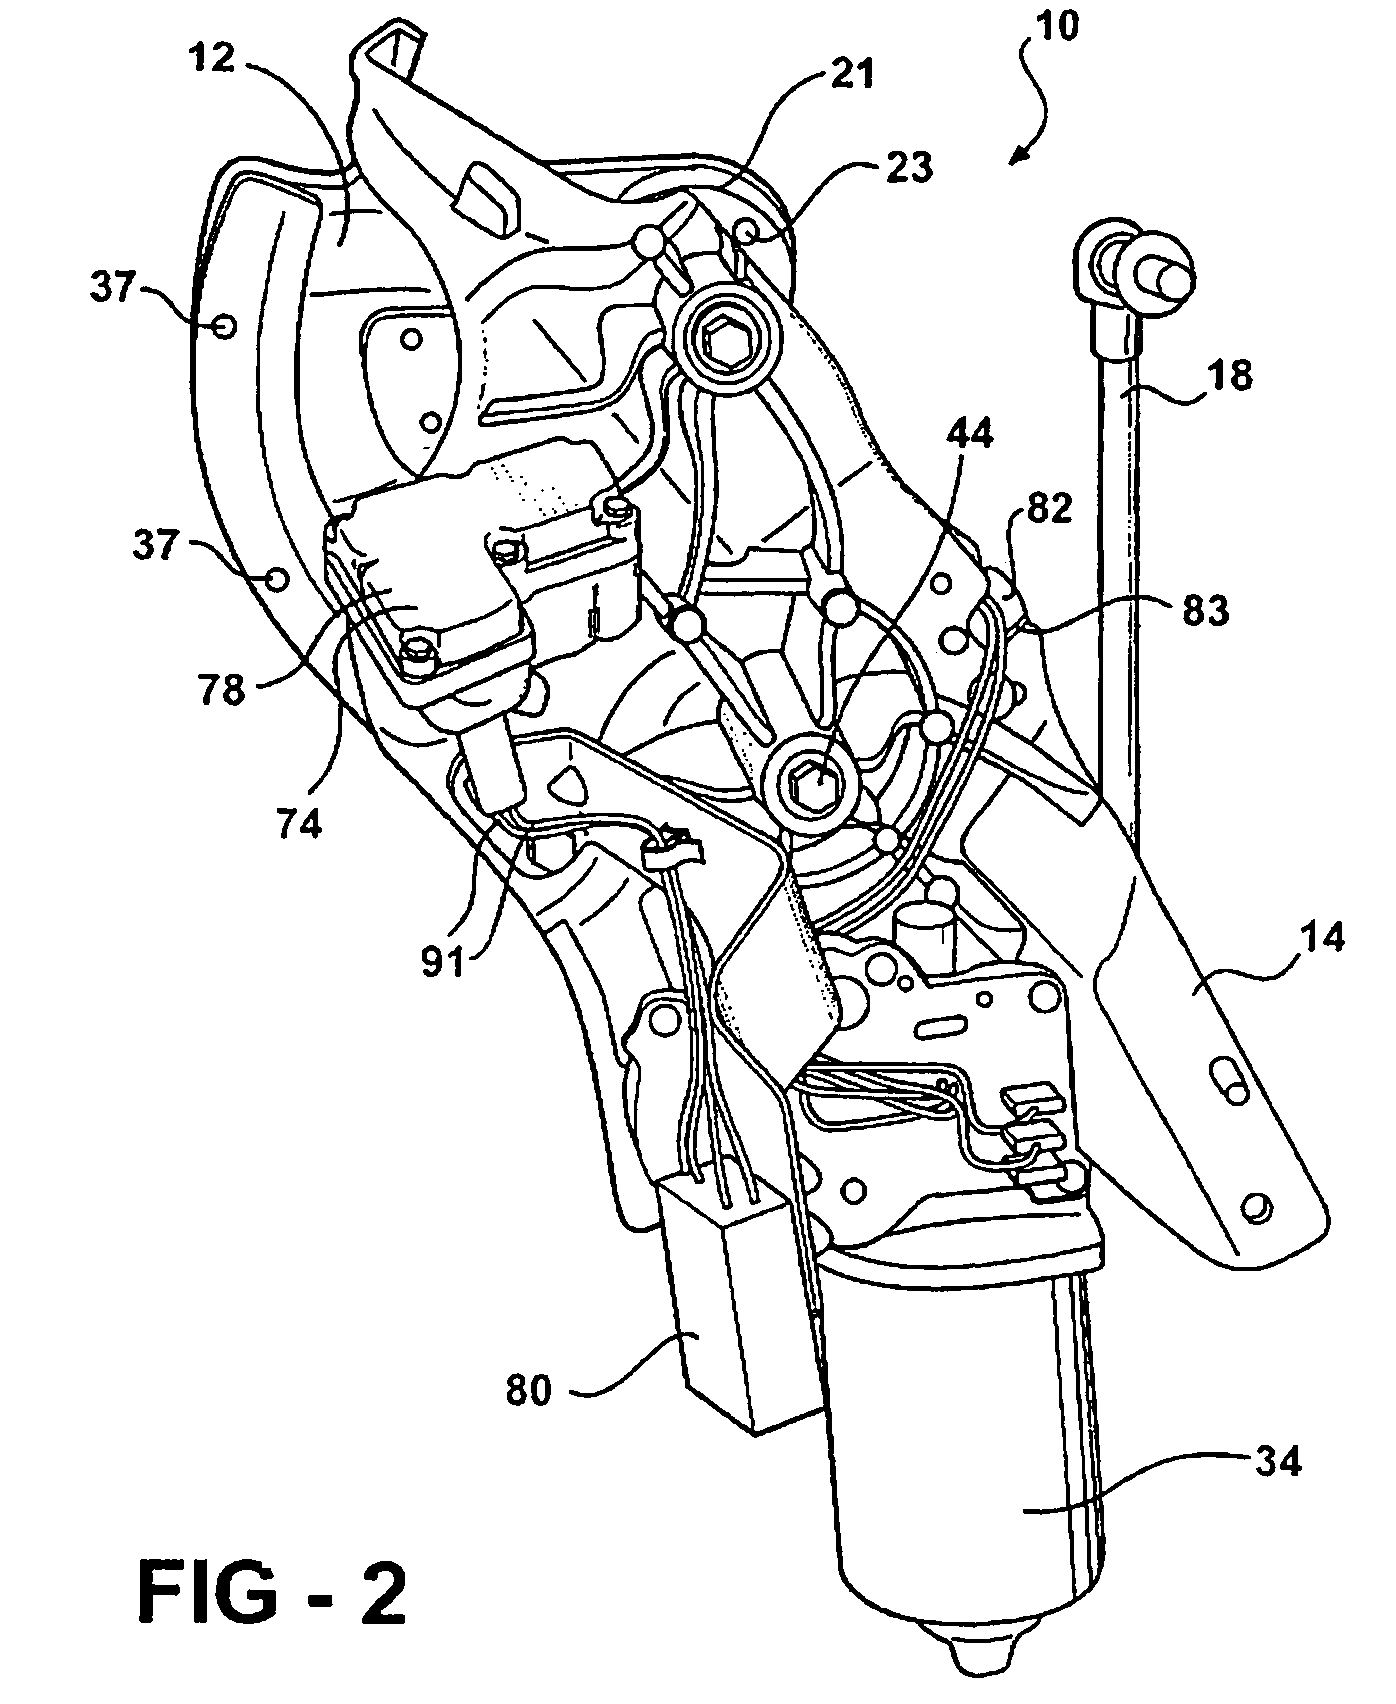 Power drive mechanism for a motor vehicle liftgate having a disengageable gear train